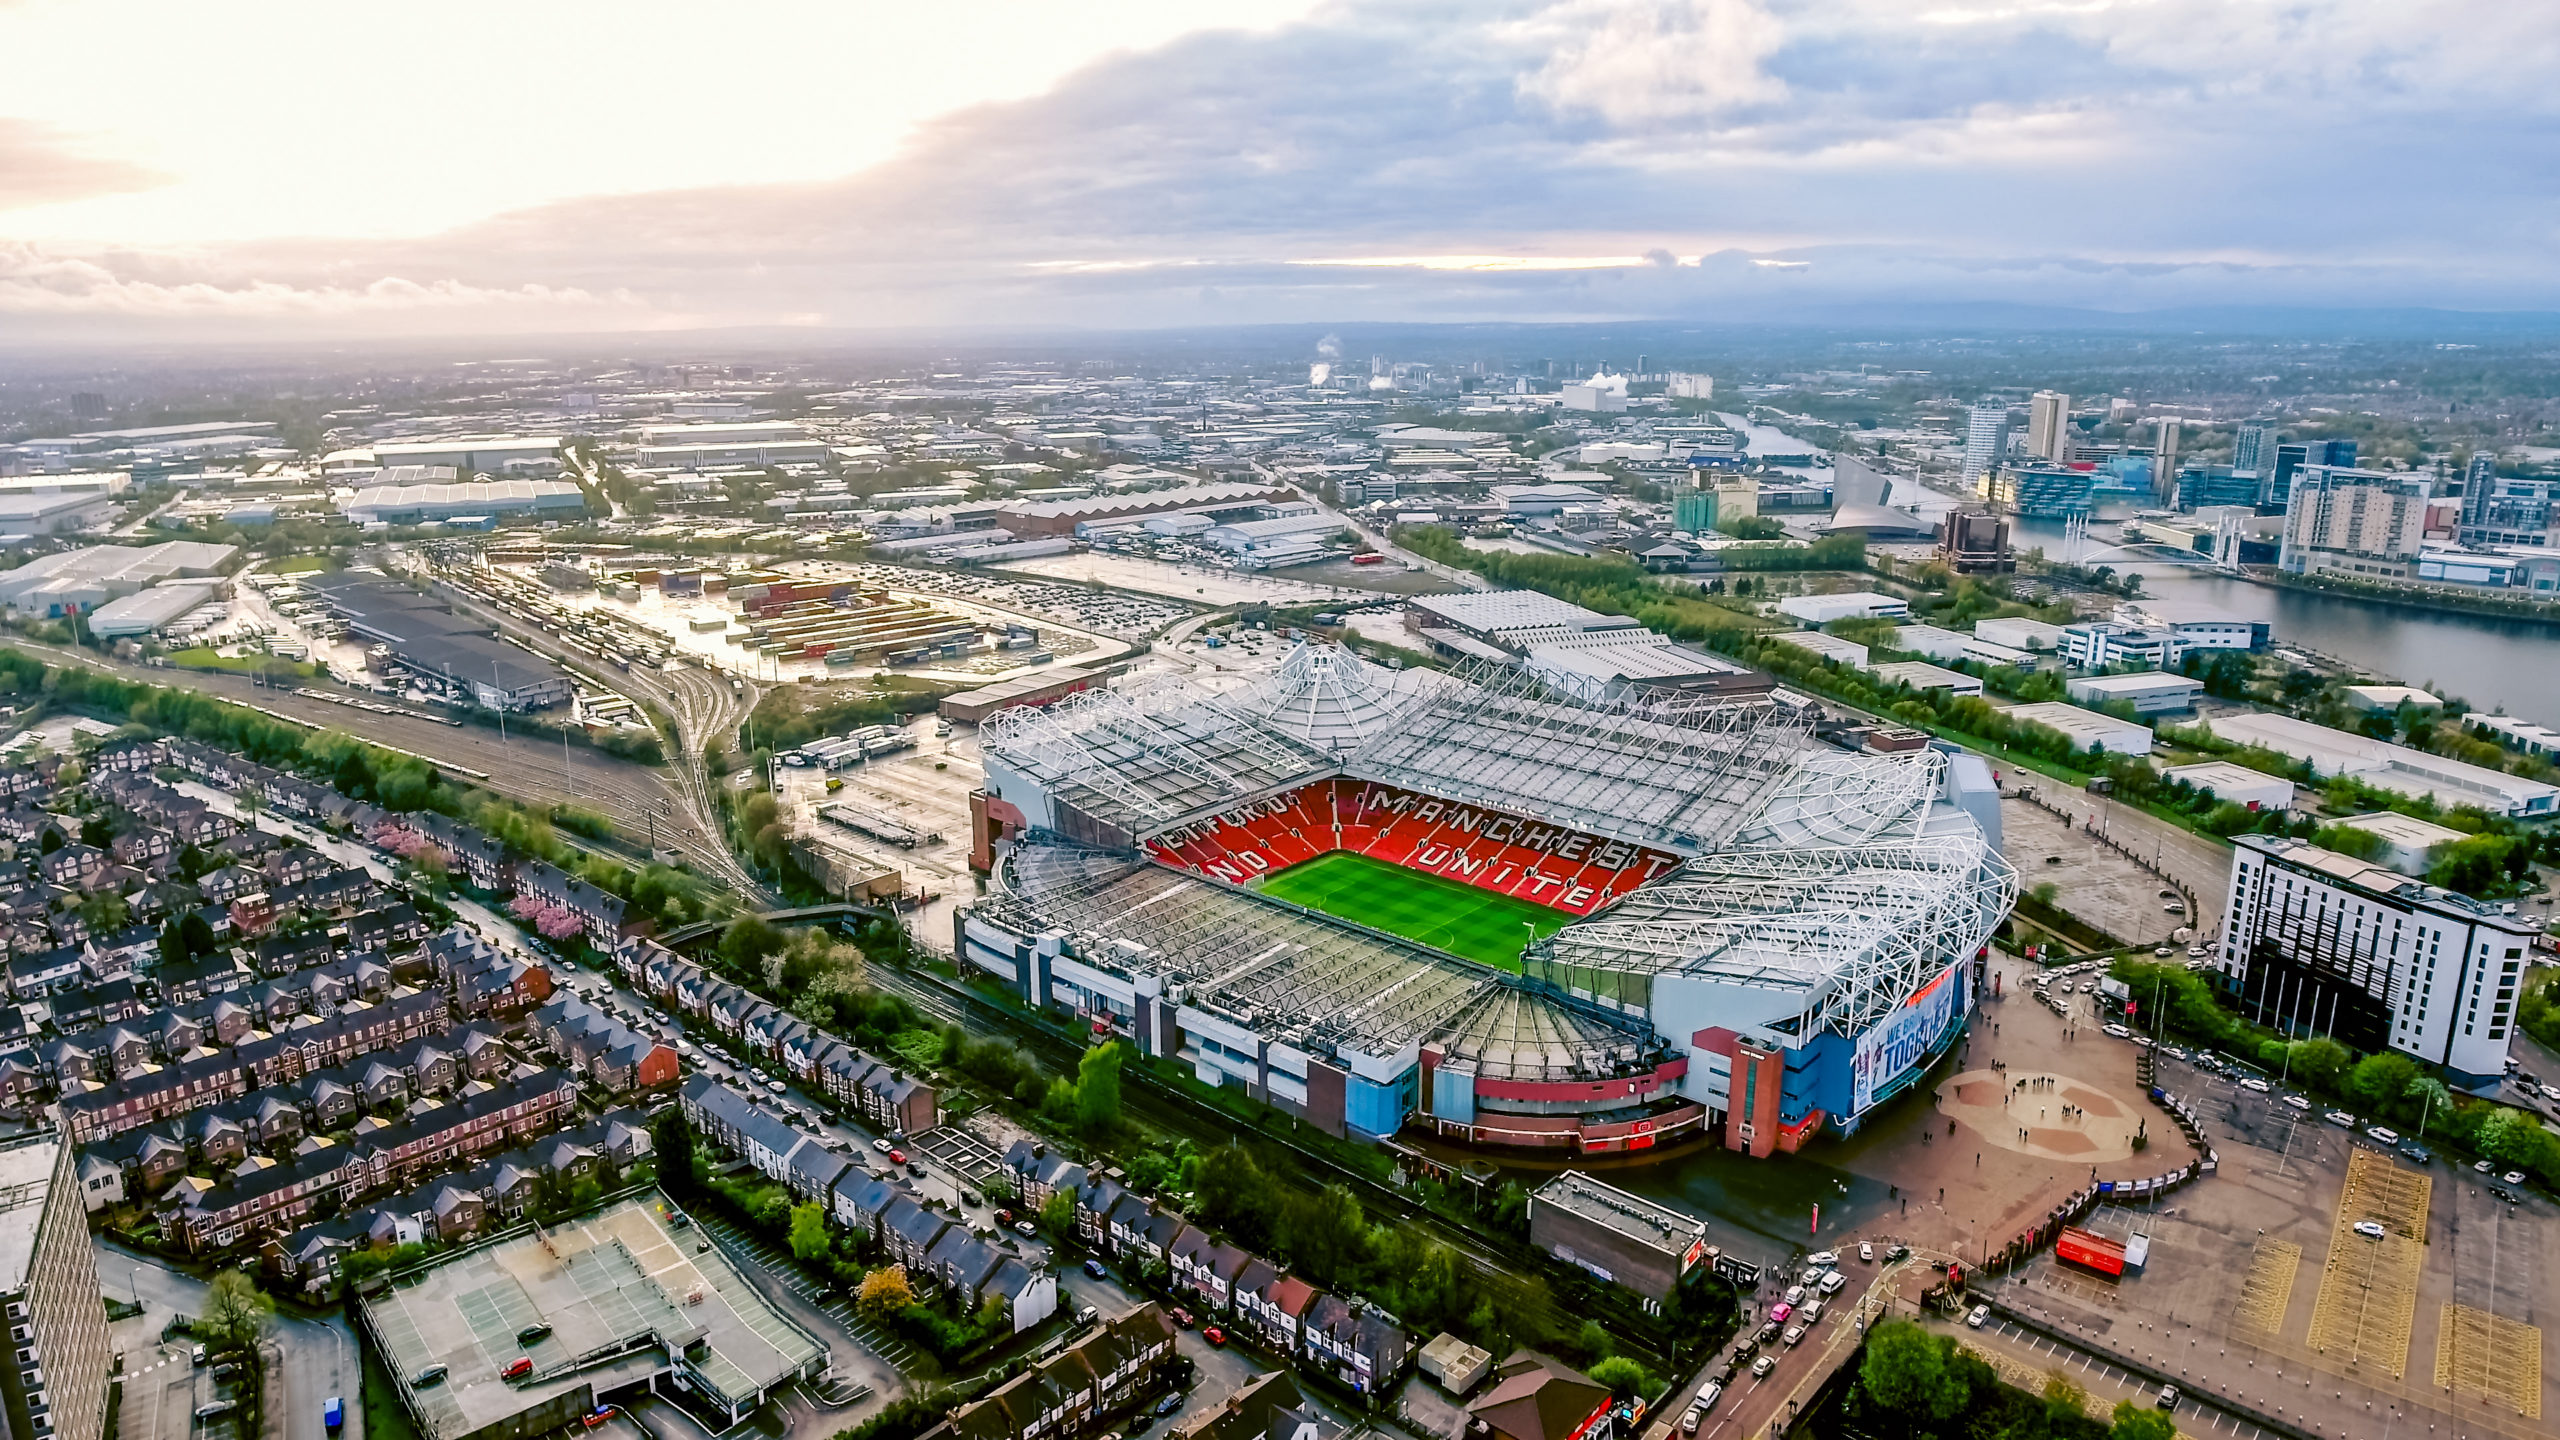 UK, Manchester - August 07, 2017: Old Trafford is a football stadium Greater Manchester England and the home of Manchester United. Aerial View of Iconic Football Ground